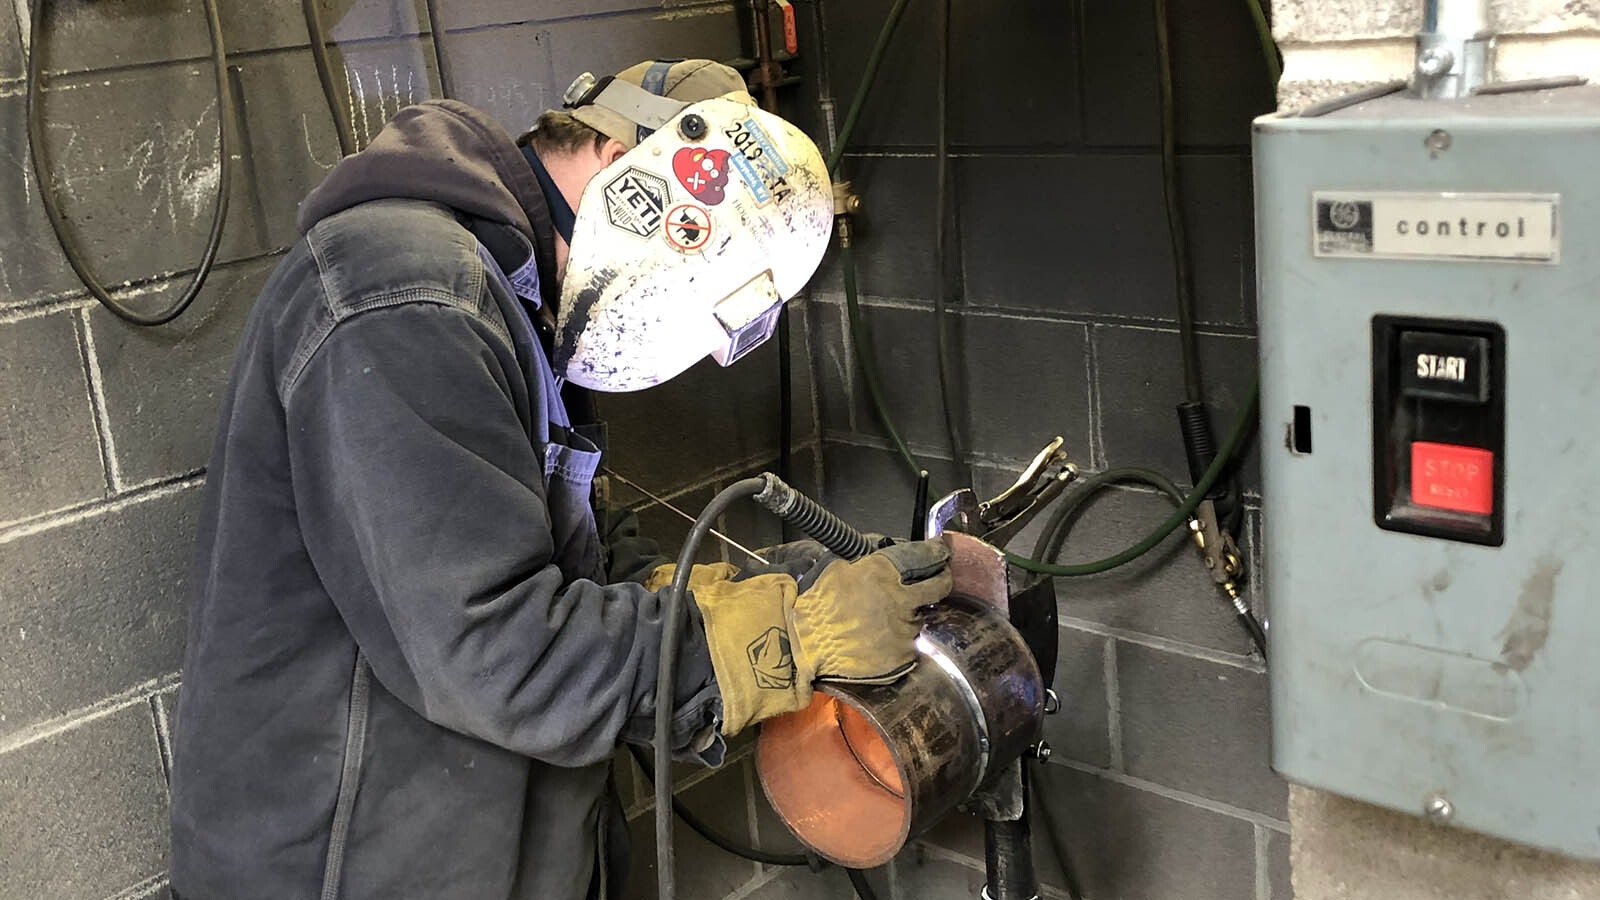 At the Plumbers and Pipe Fitters Union in Cheyenne, students learning their trades are more focused on working and completing their programs than soicial and political issues.